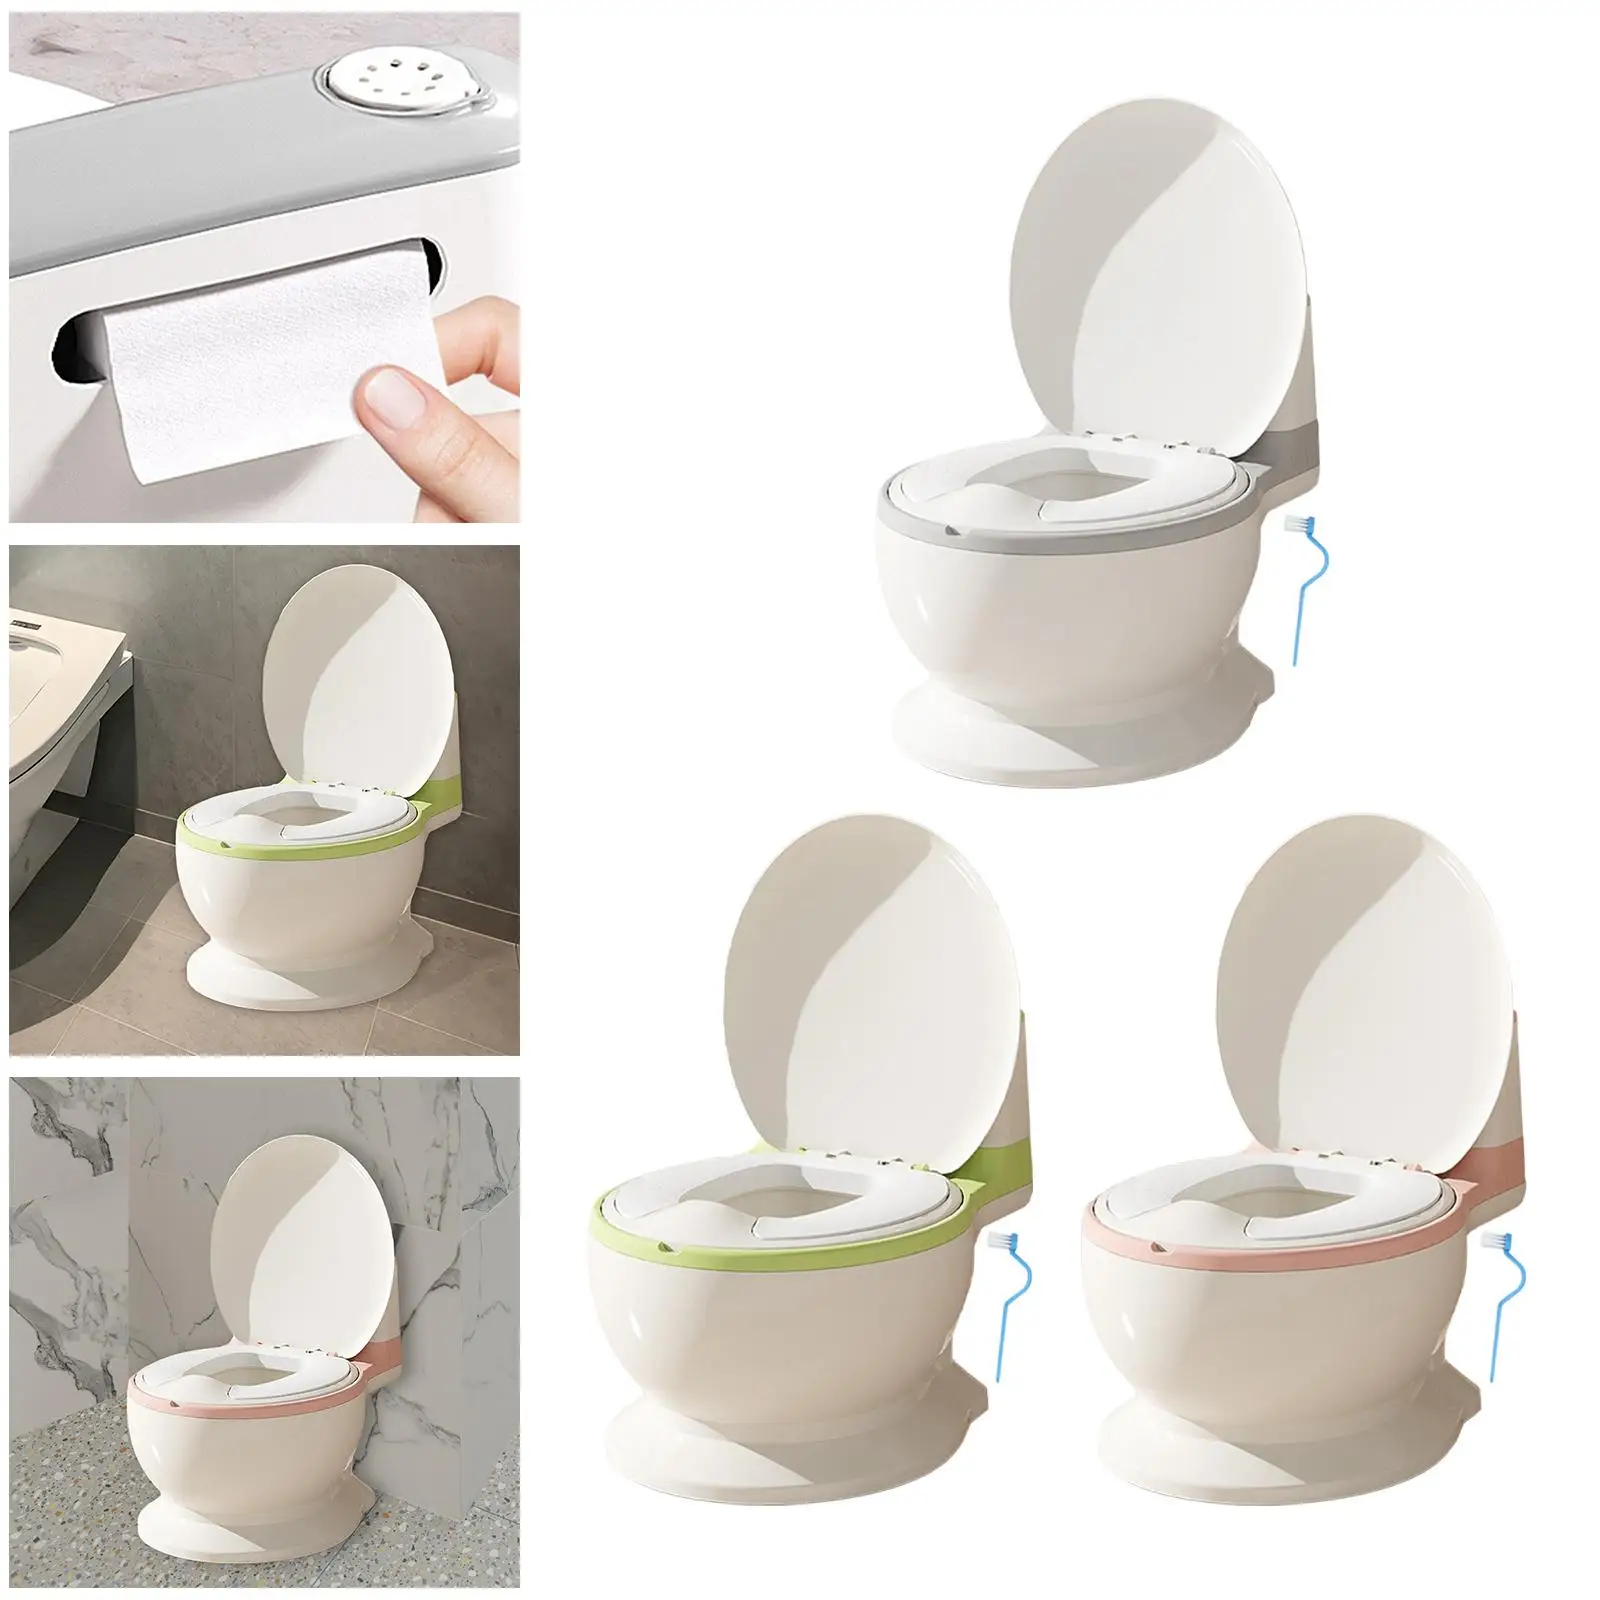 Toilet Training Potty Non Slip Real Feel Potty for Ages 0-7 Babies Infants